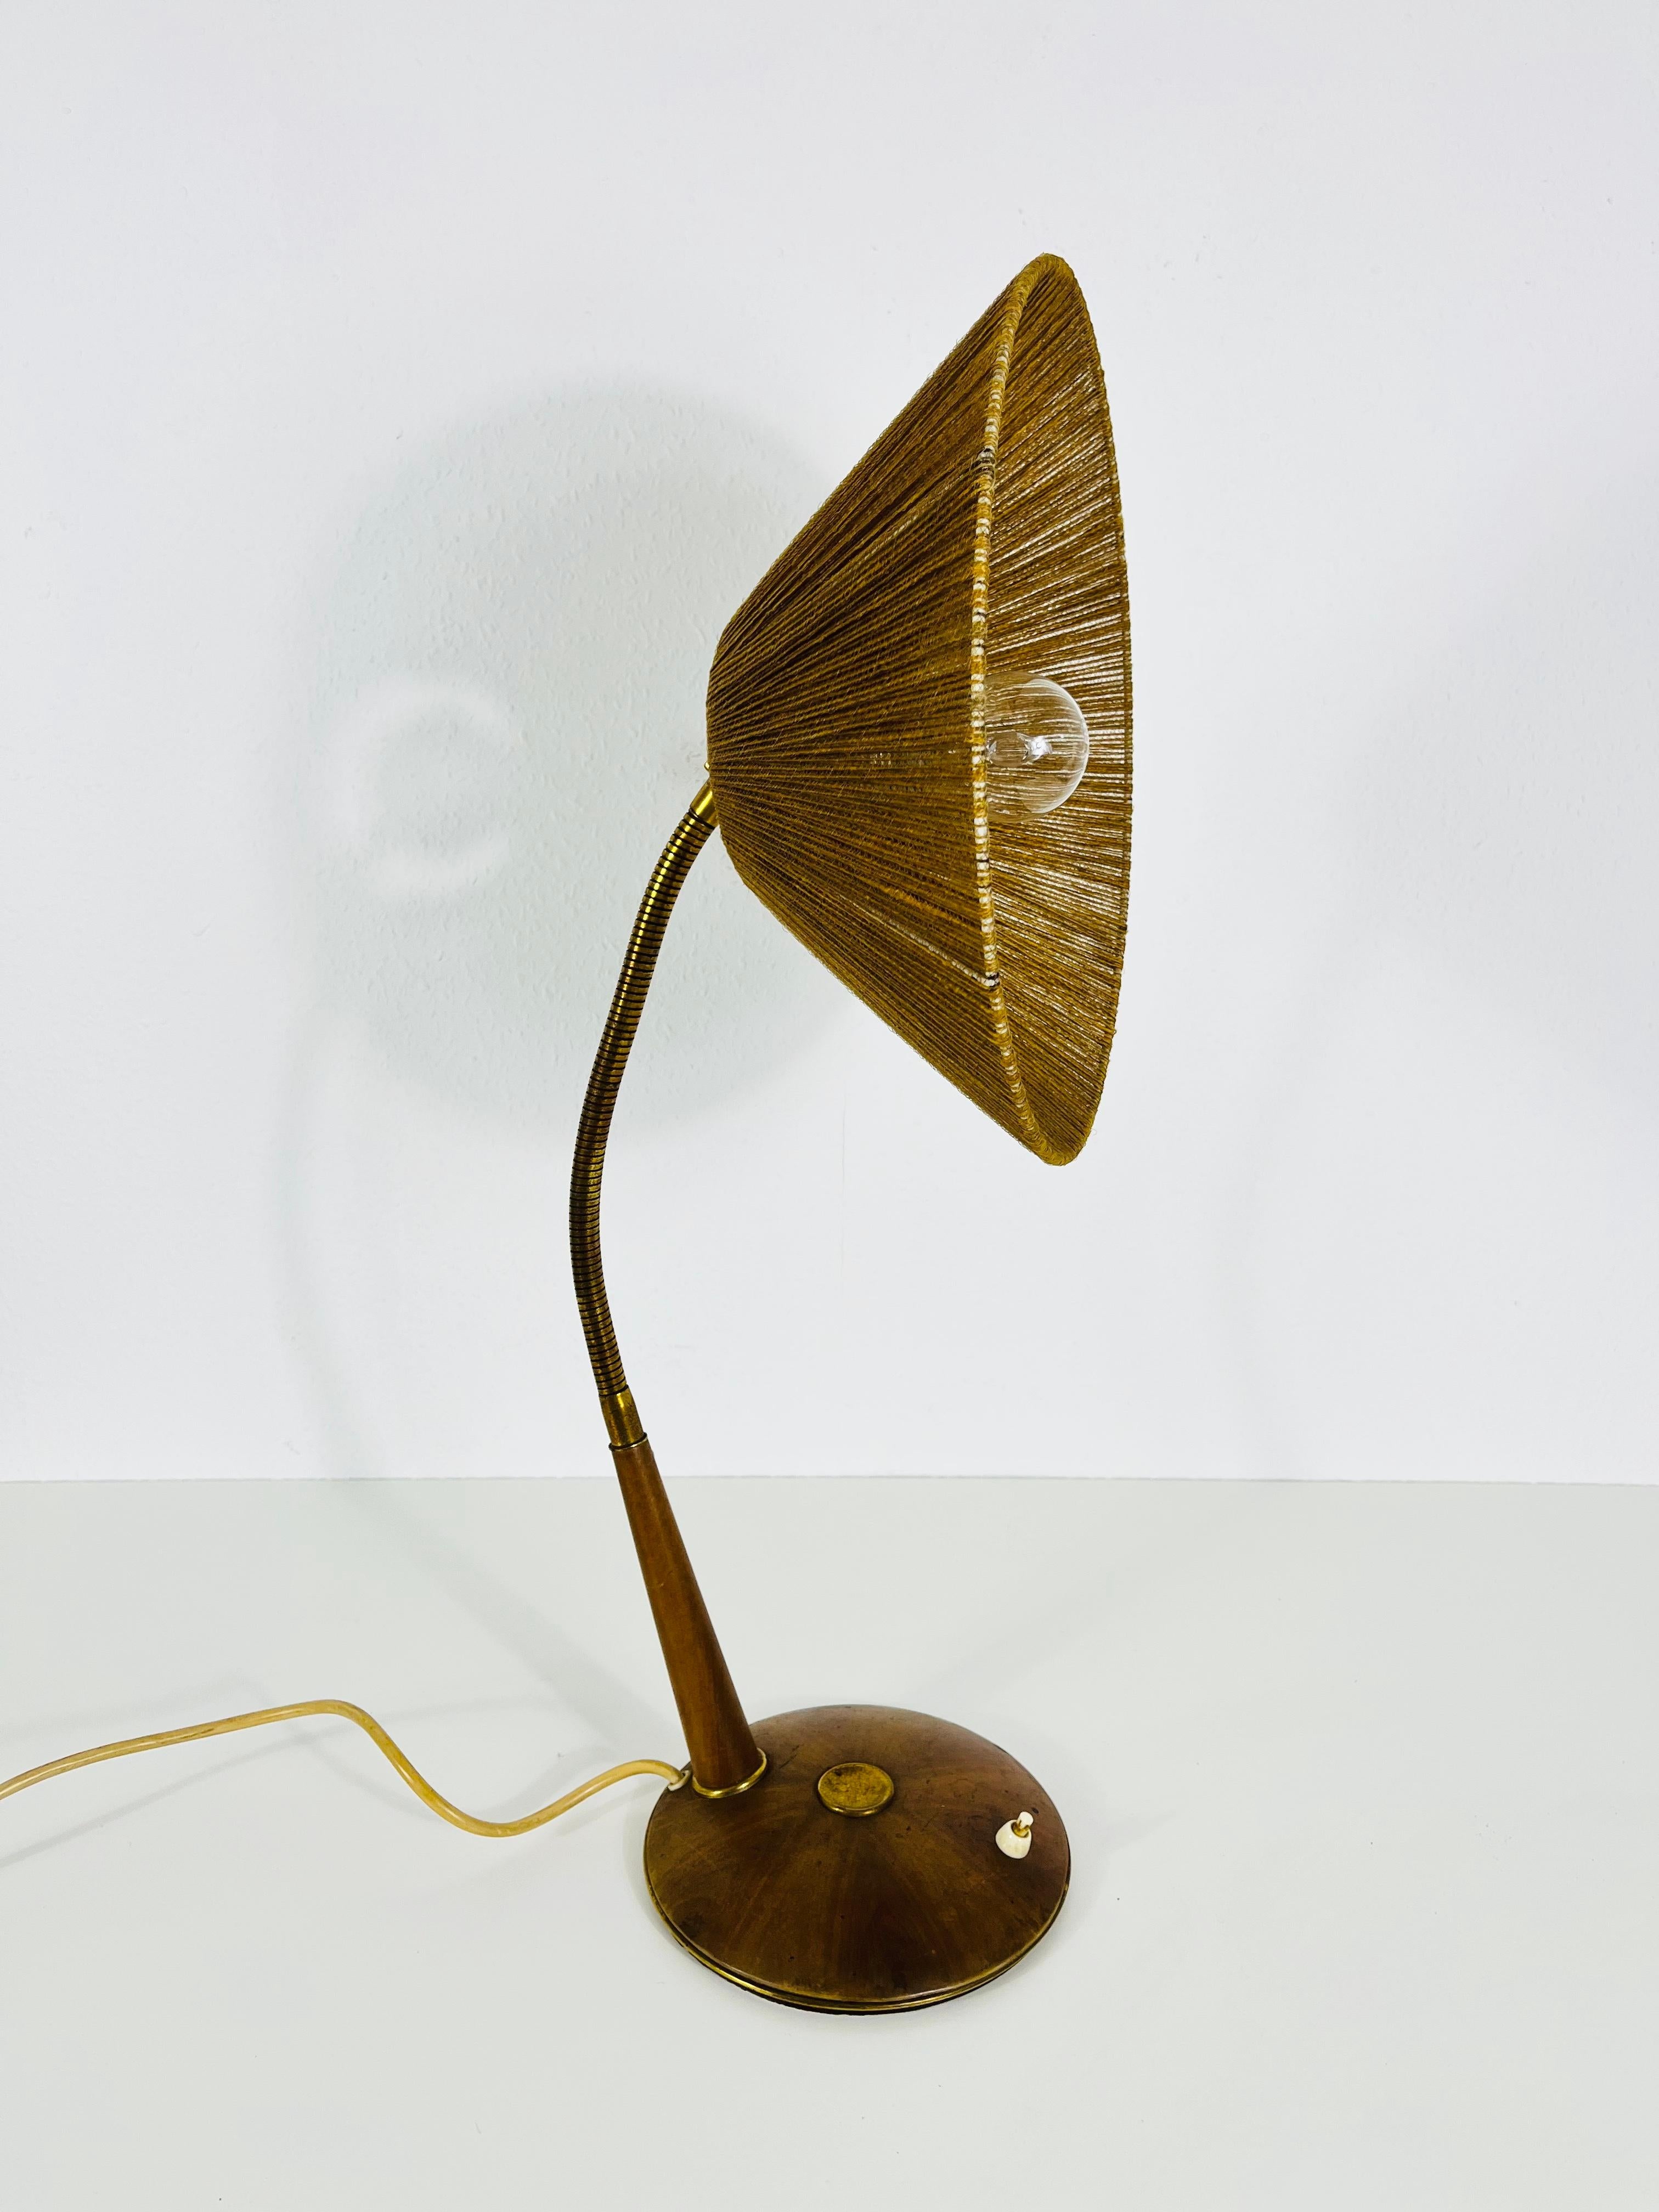 Midcentury Teak and Rattan Table Lamp by Temde, circa 1970 For Sale 1